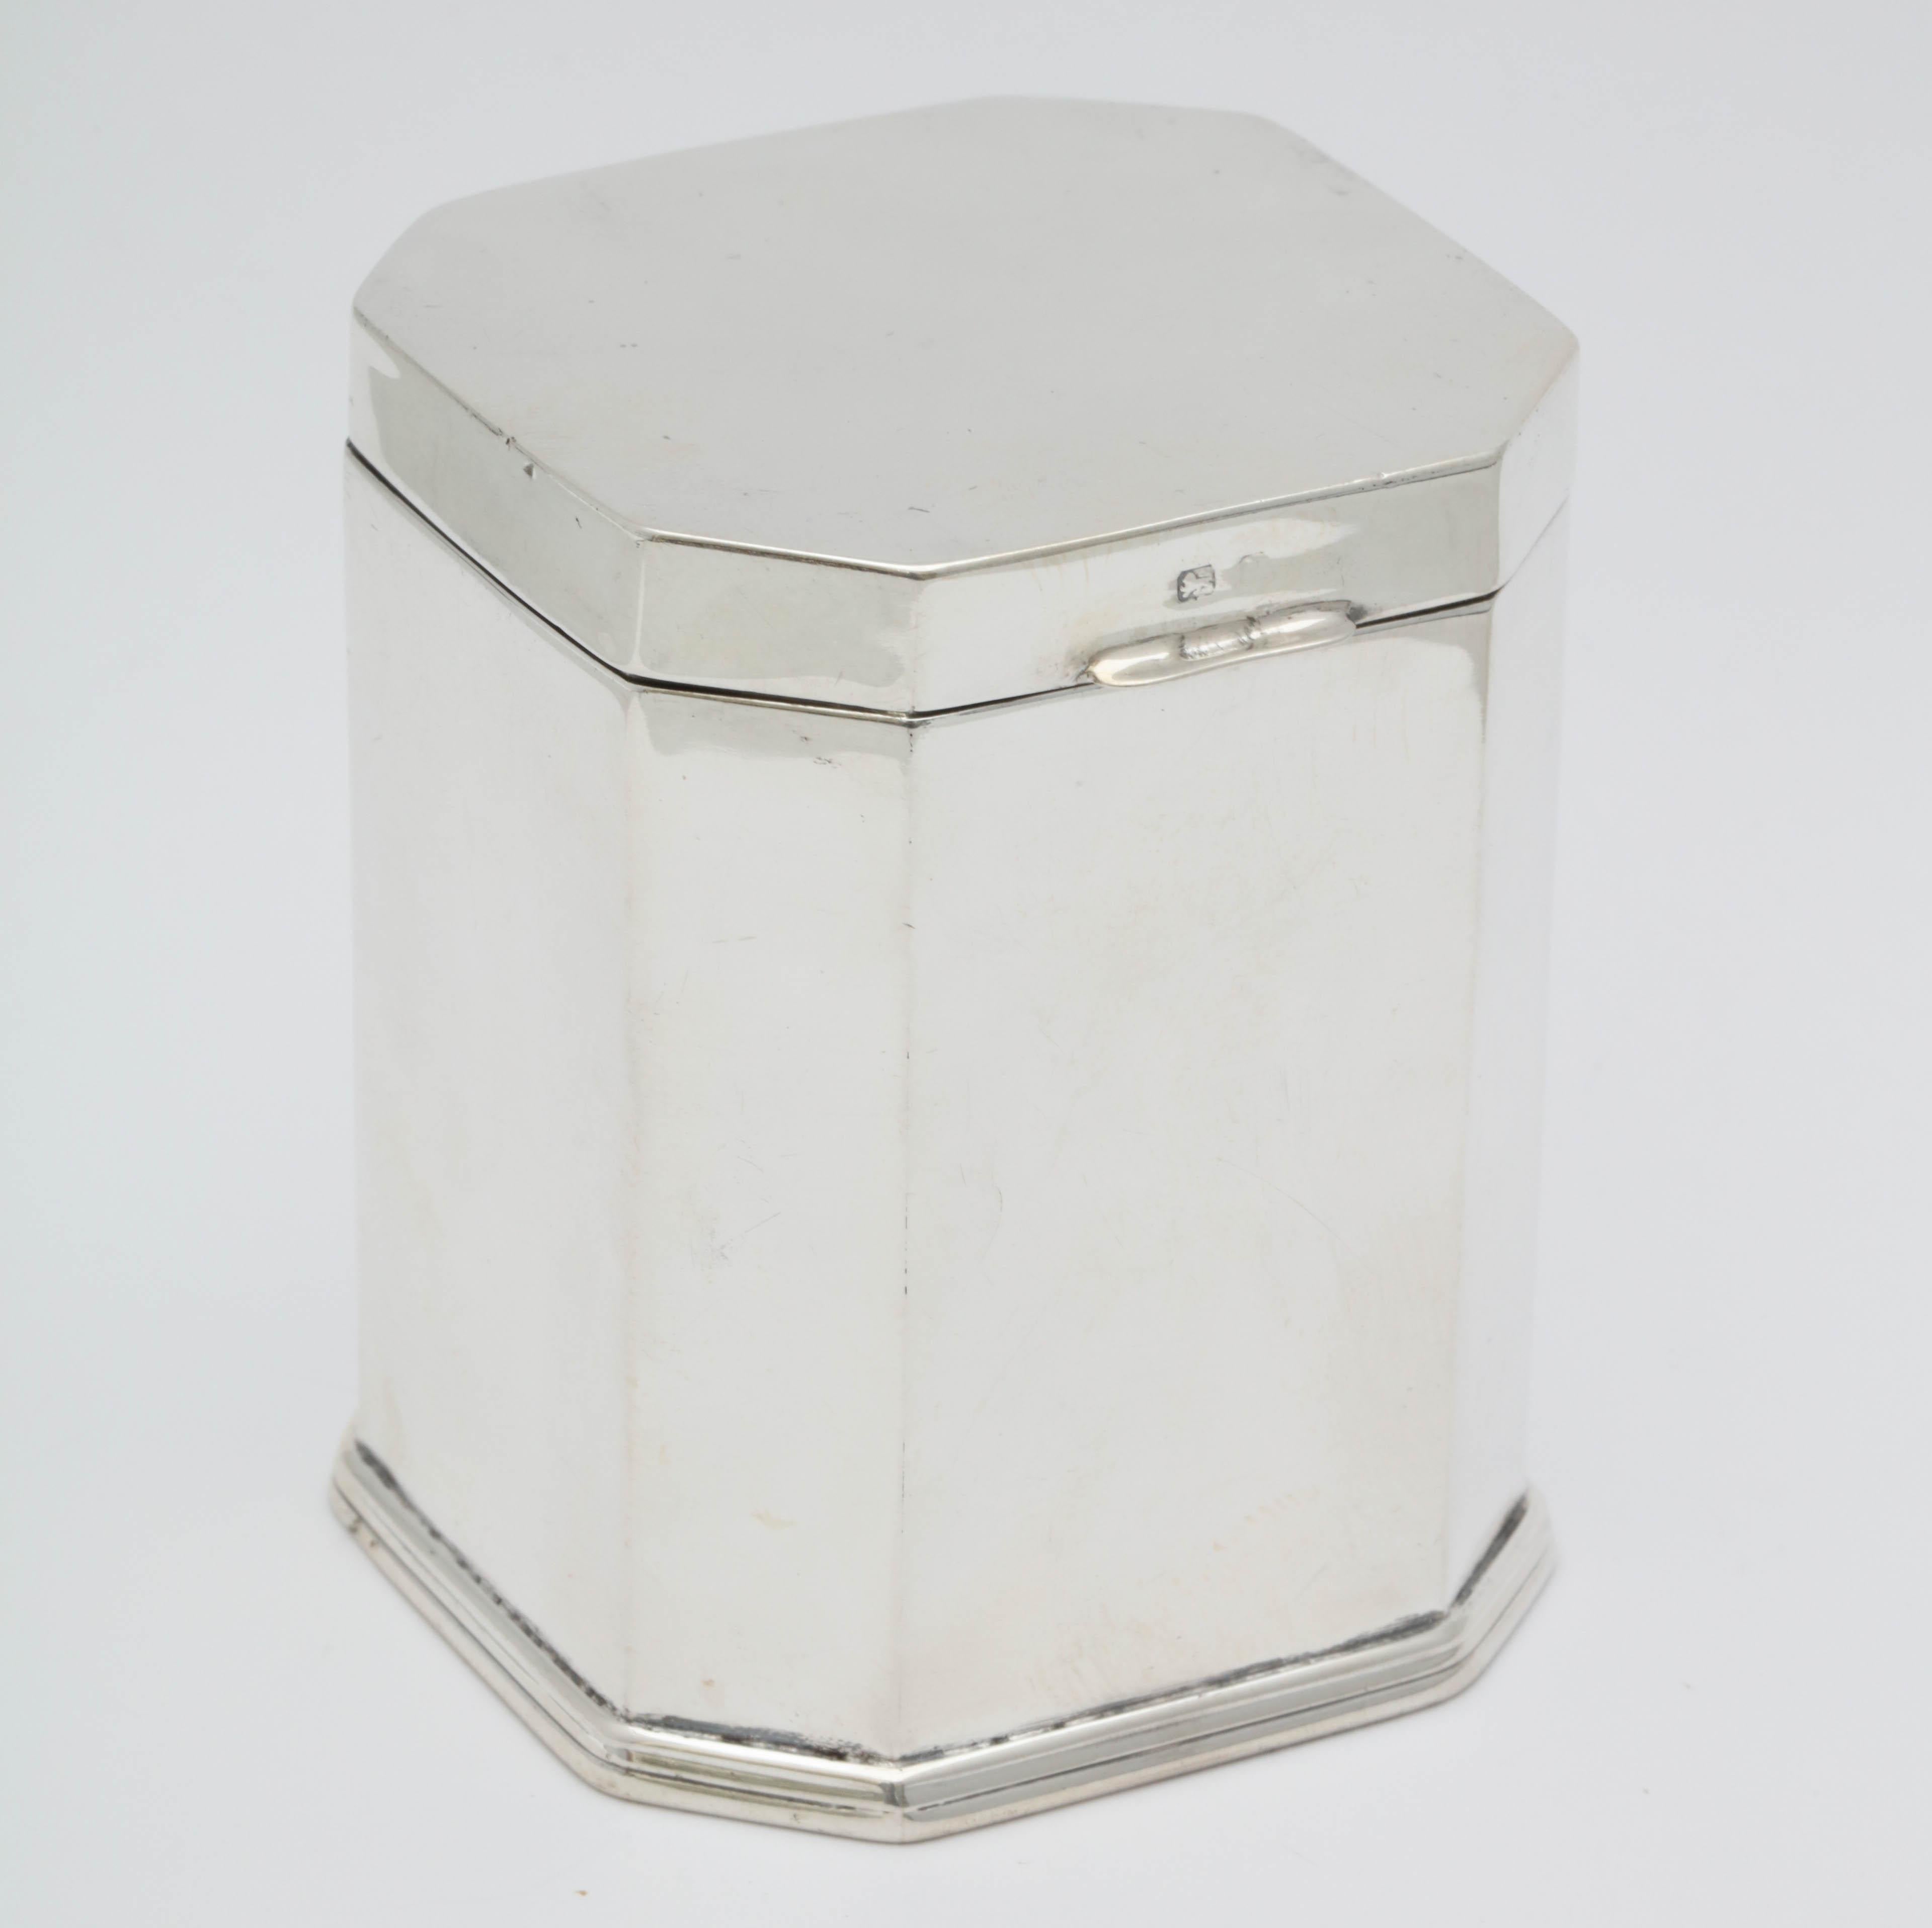 Beautiful, Edwardian, sterling silver, octagonal tea caddy with hinged lid, Birmingham, England, 1907, Levi and Salamon - makers. Measures over 2 3/4 inches high x 2 1/2 inches deep x 2 1/2 inches wide. Interior is gilded. A very small bit of